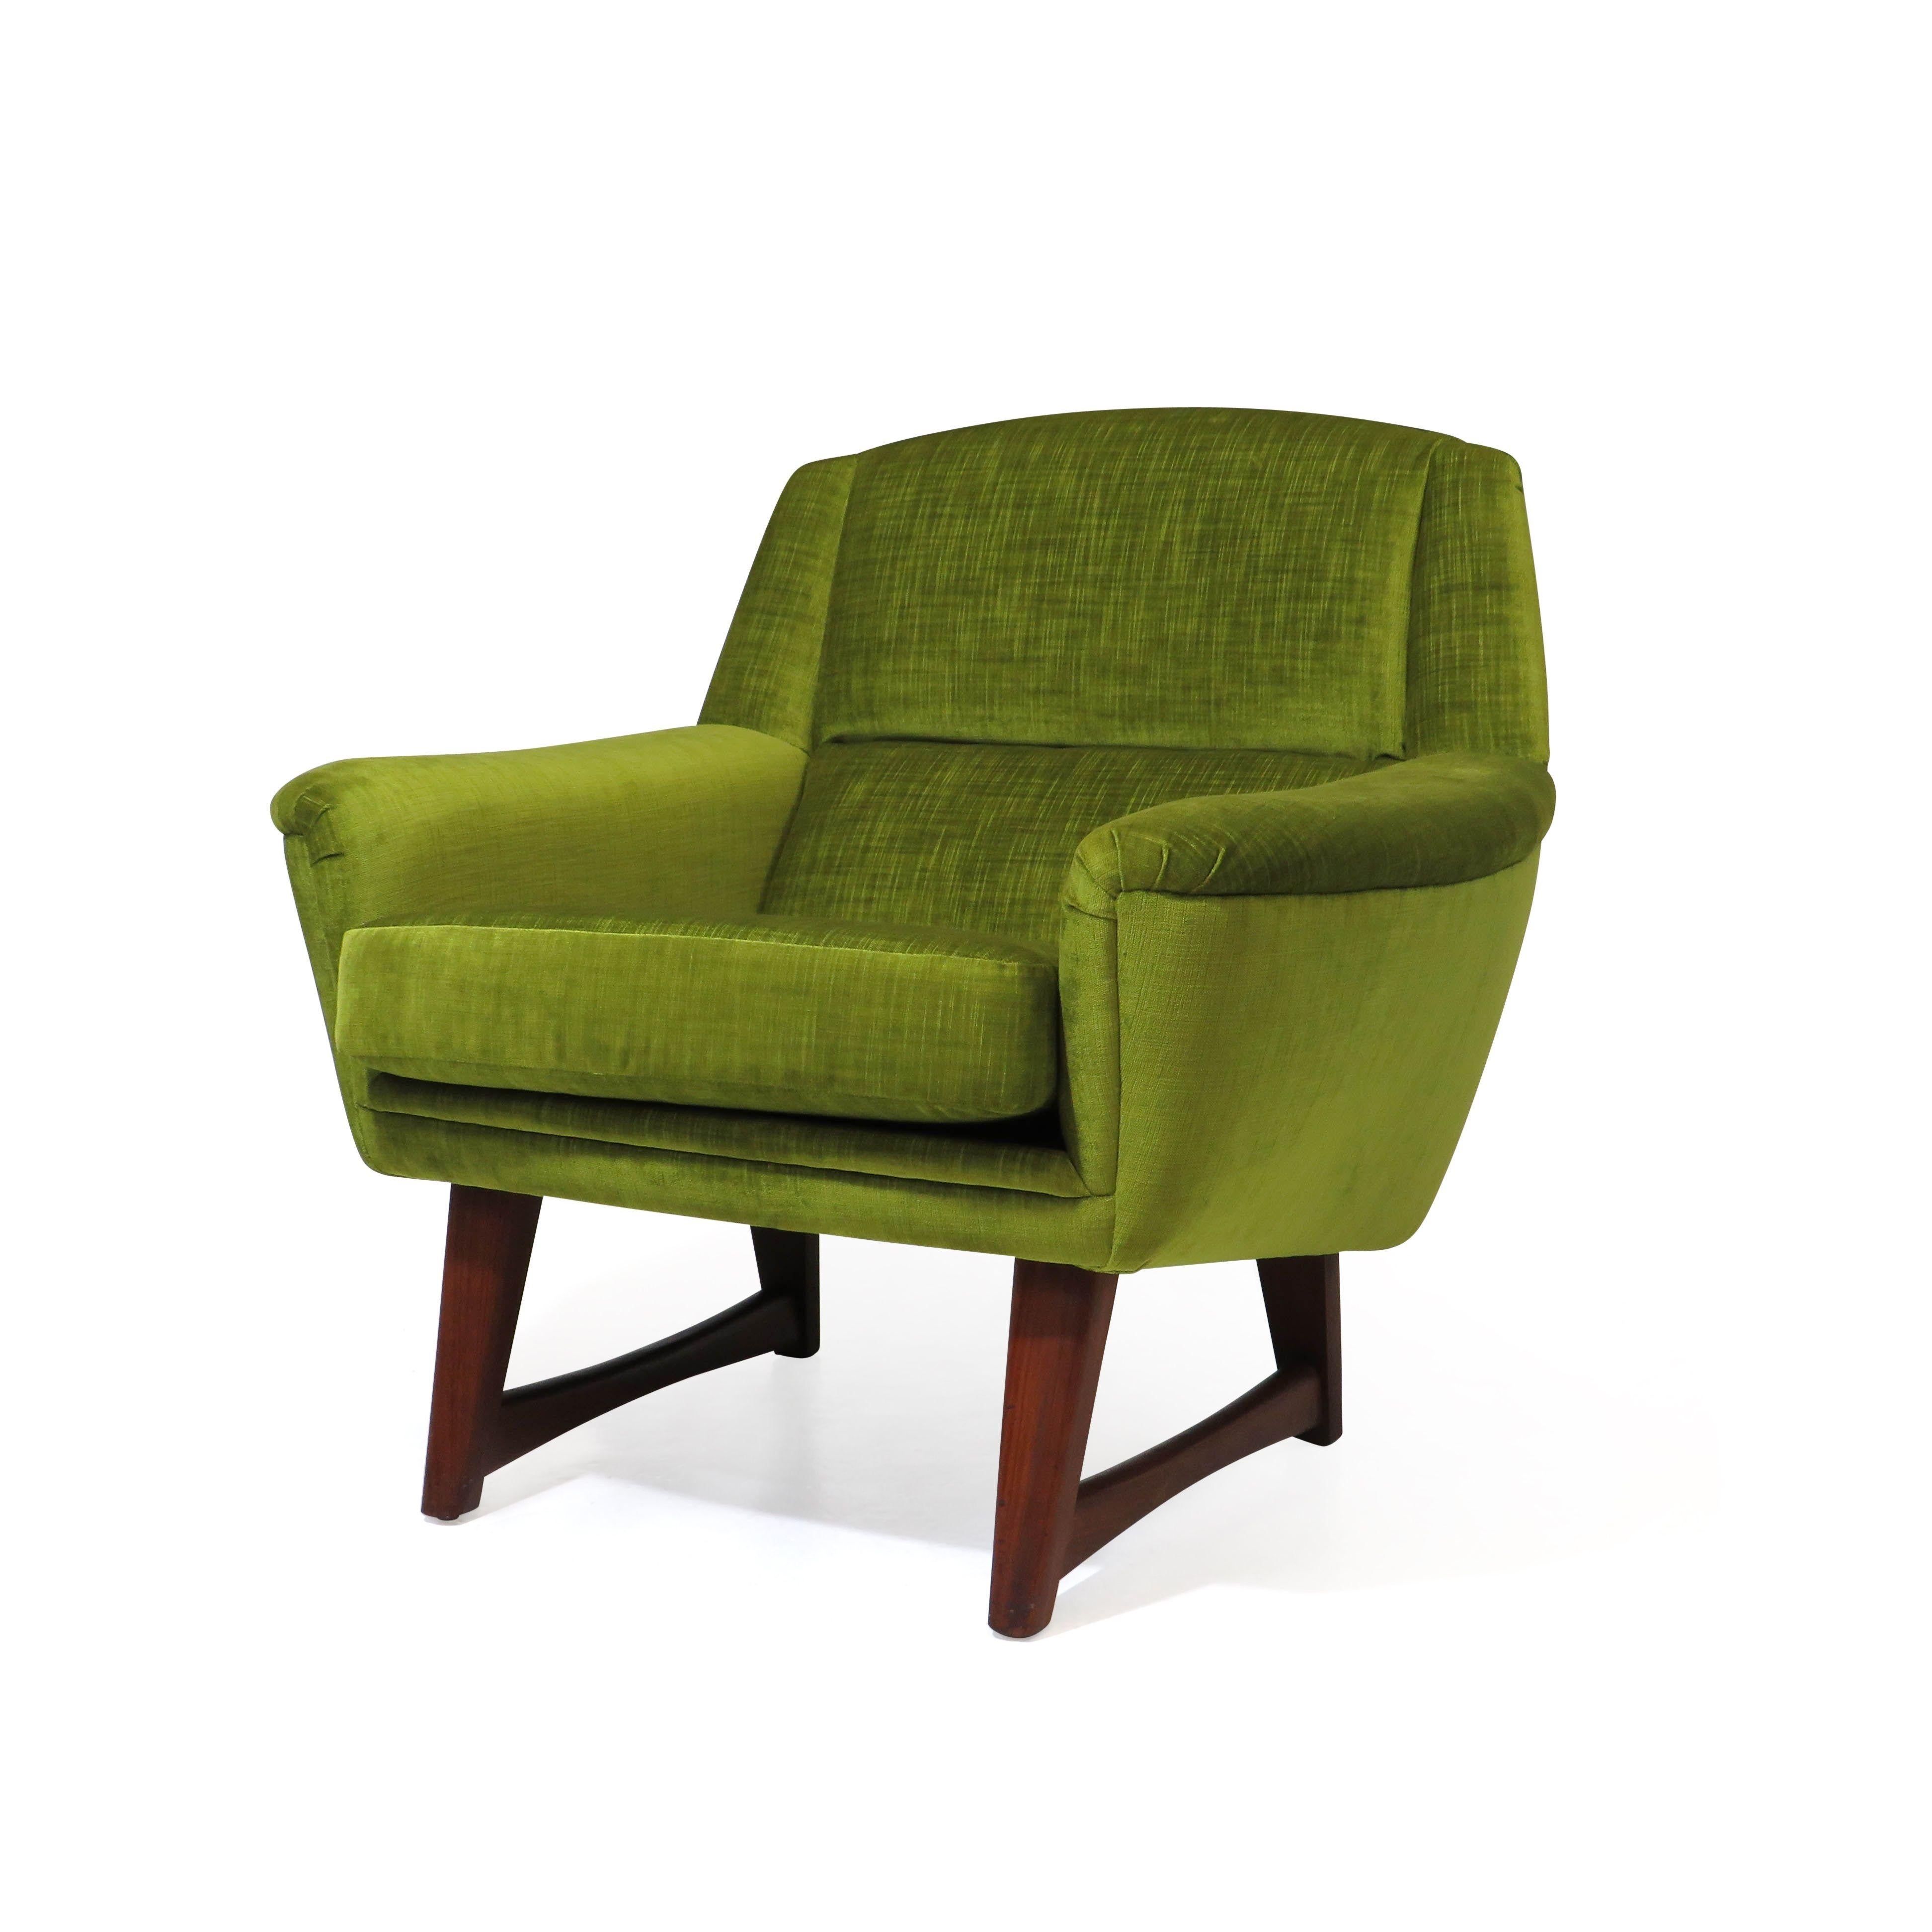 High-quality 1950's lounge chair crafted of a solid walnut frame and newly upholstered in a lime green velvet. Excellent condition.

